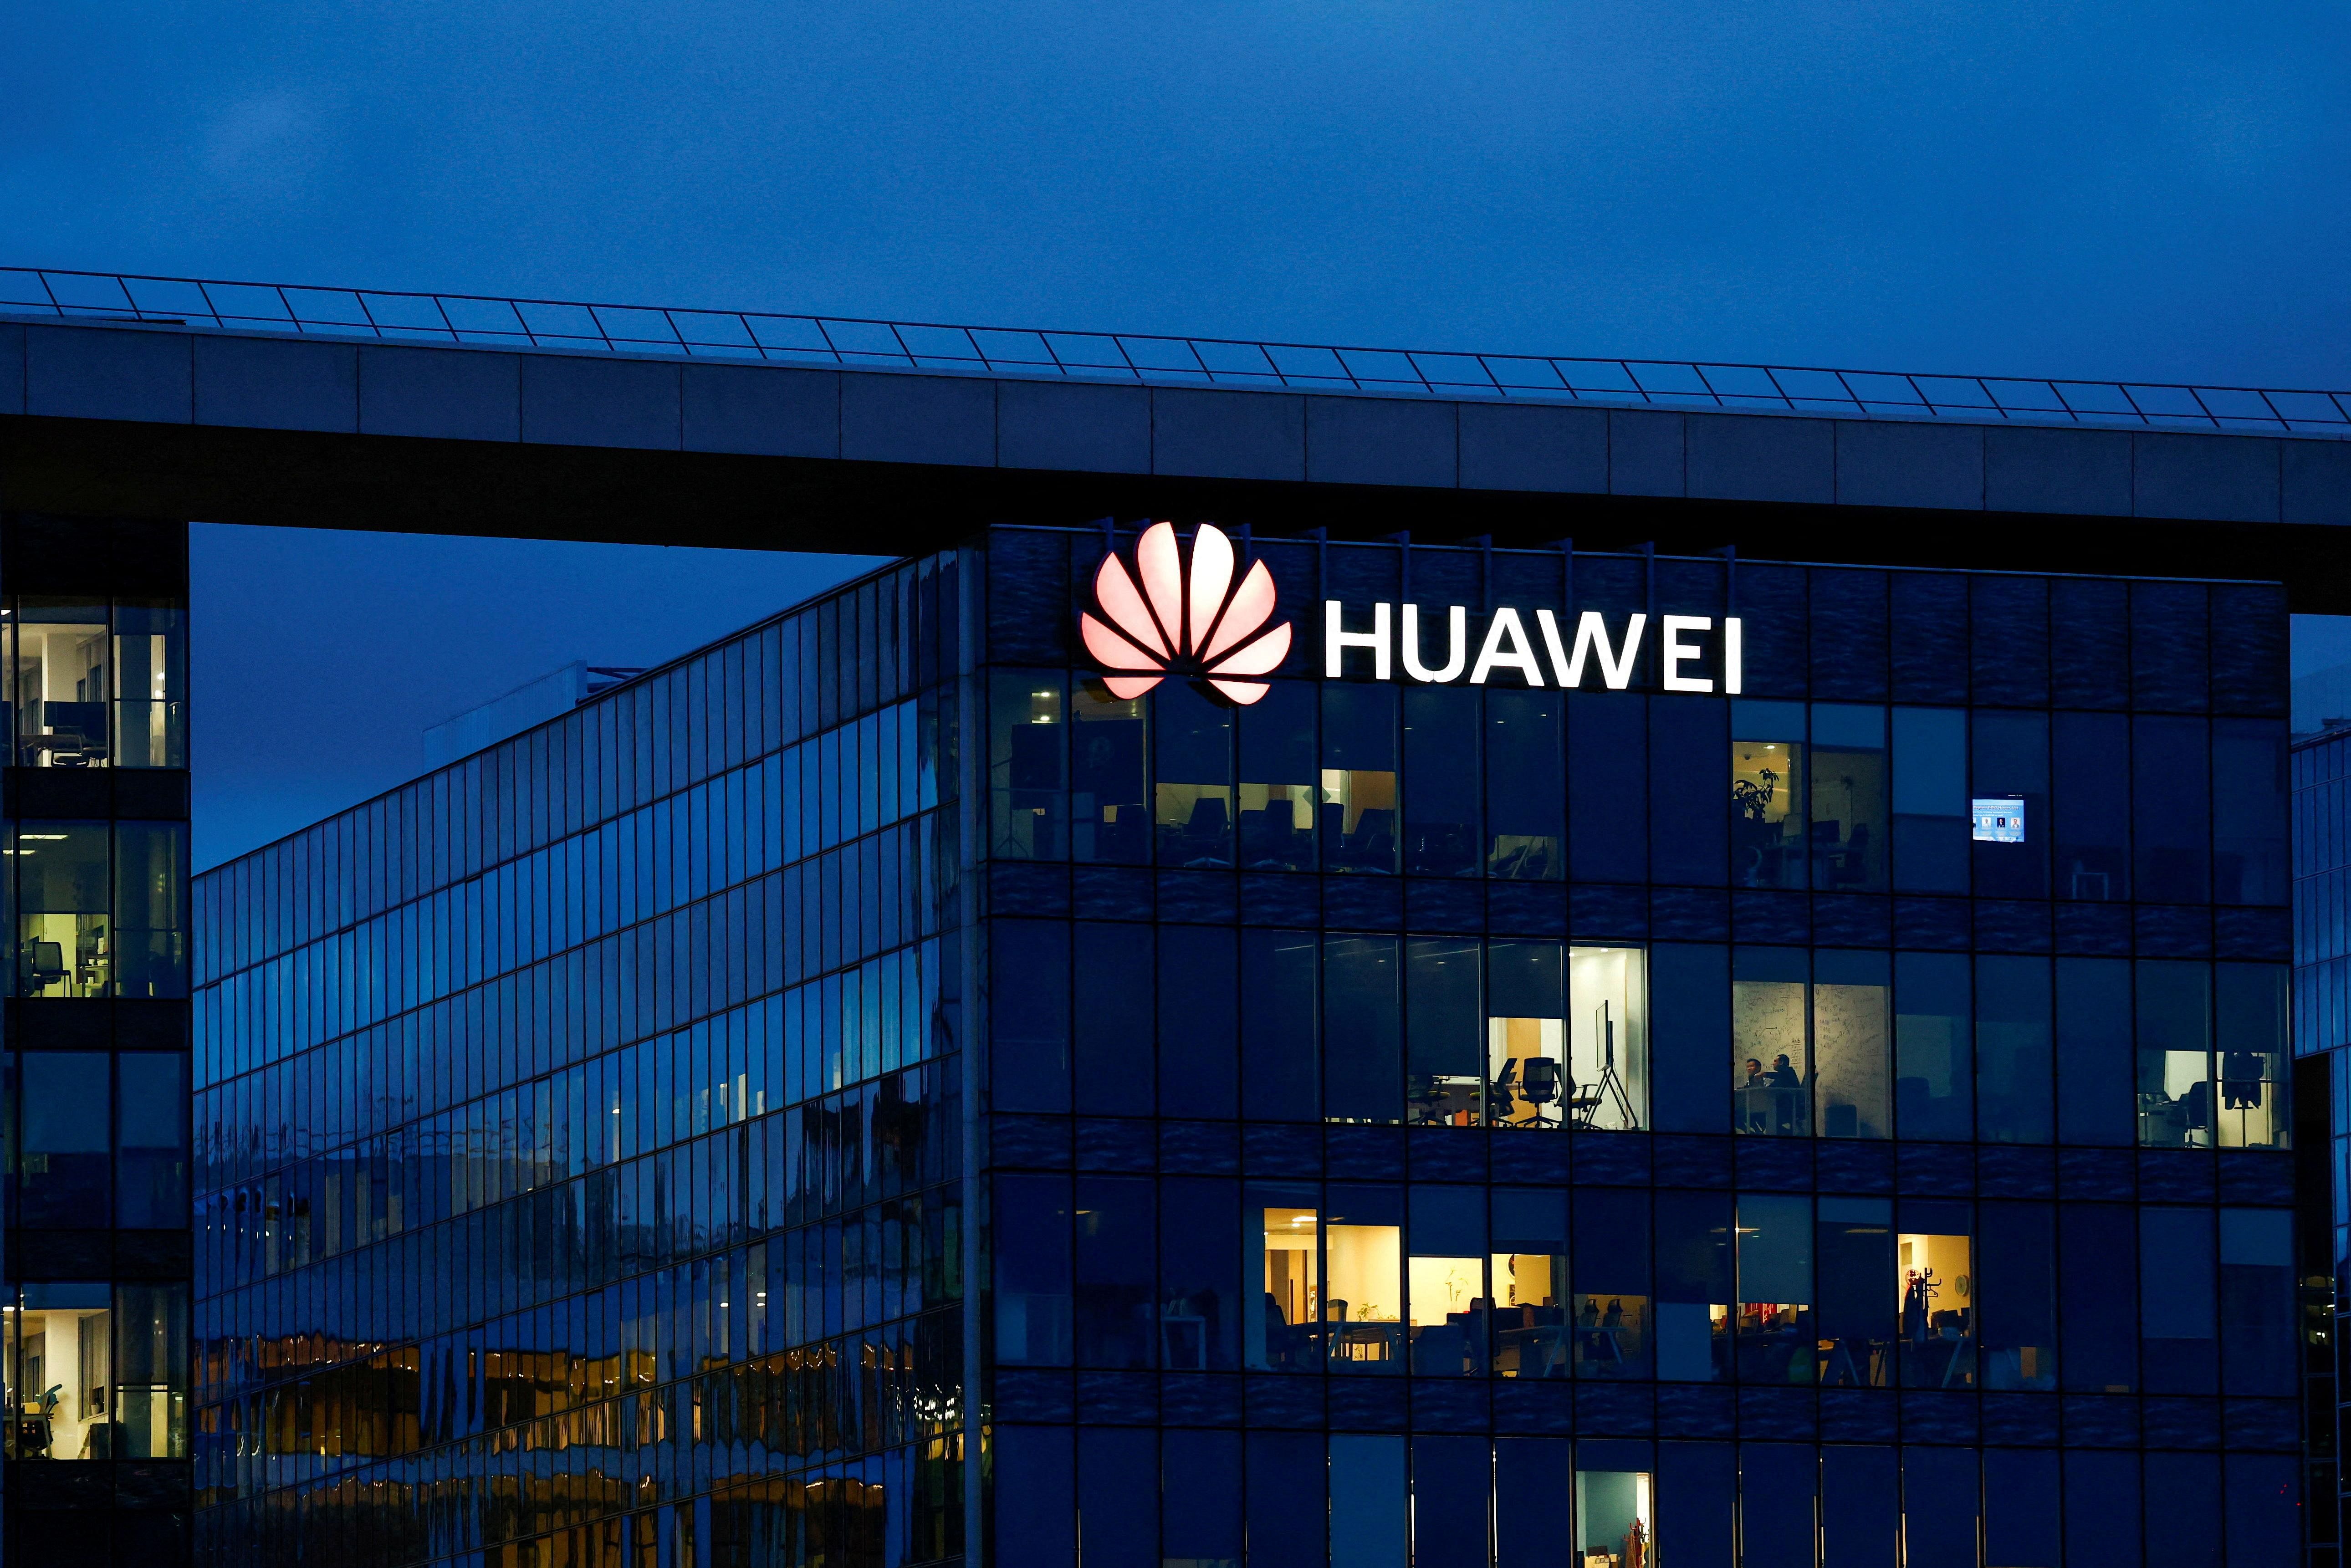 Huawei teases launch of new smartphone; high-end model anticipated